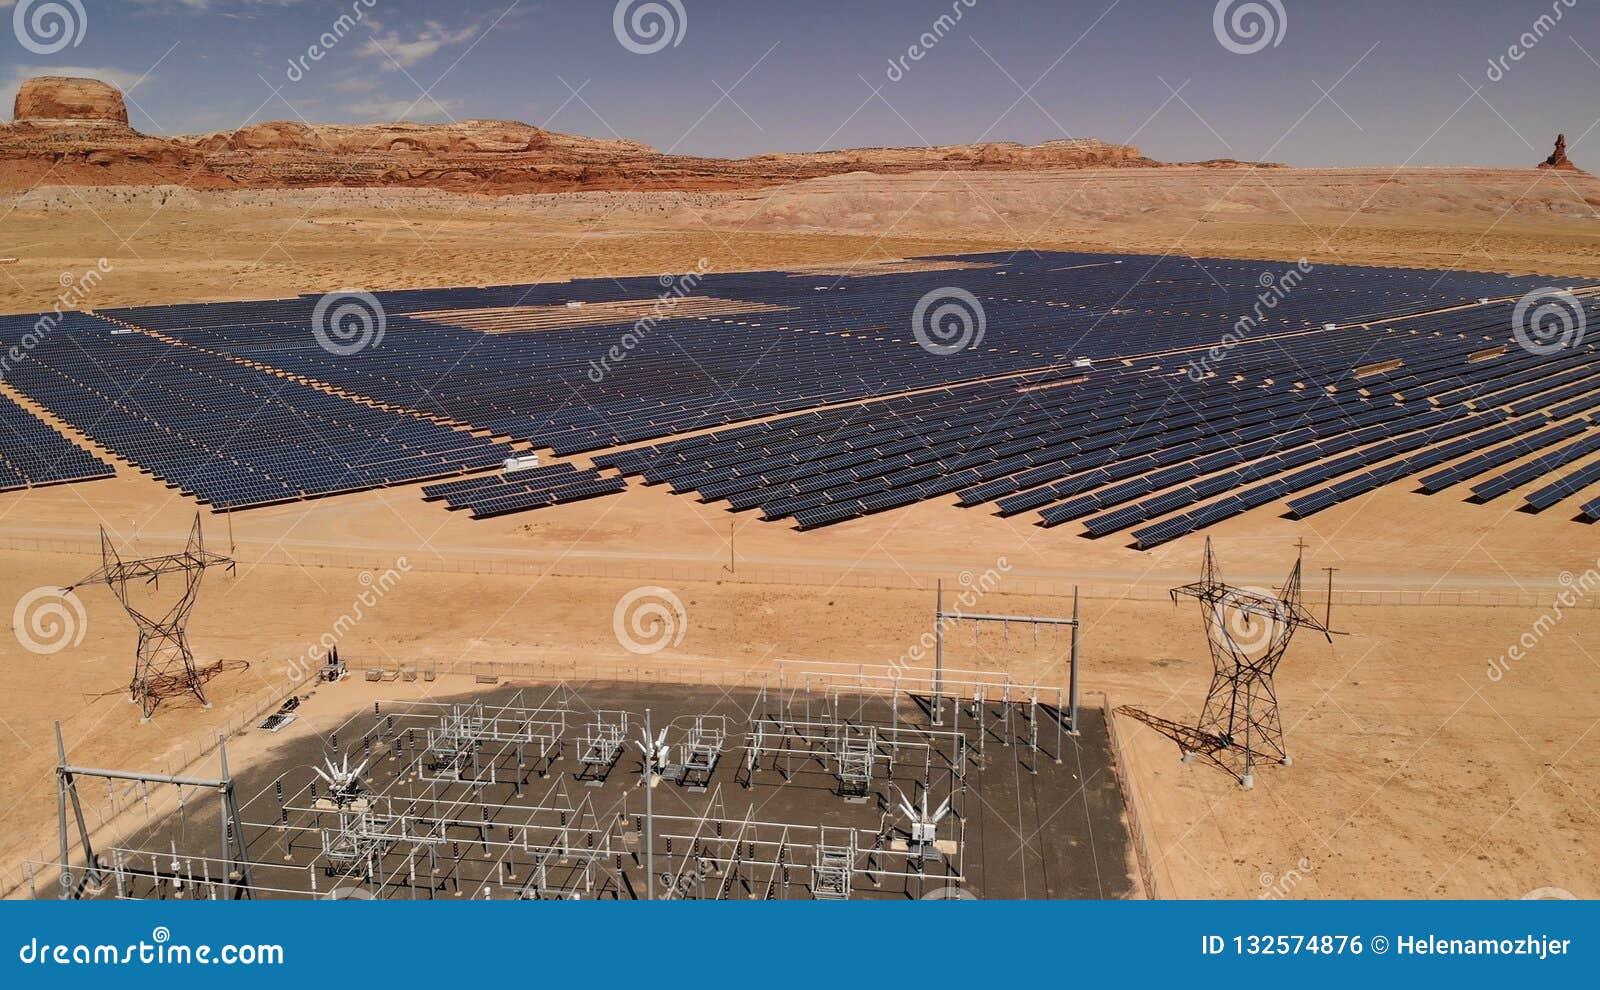 aerial-view-of-solar-power-plant-located-in-arizona-united-stat-stock